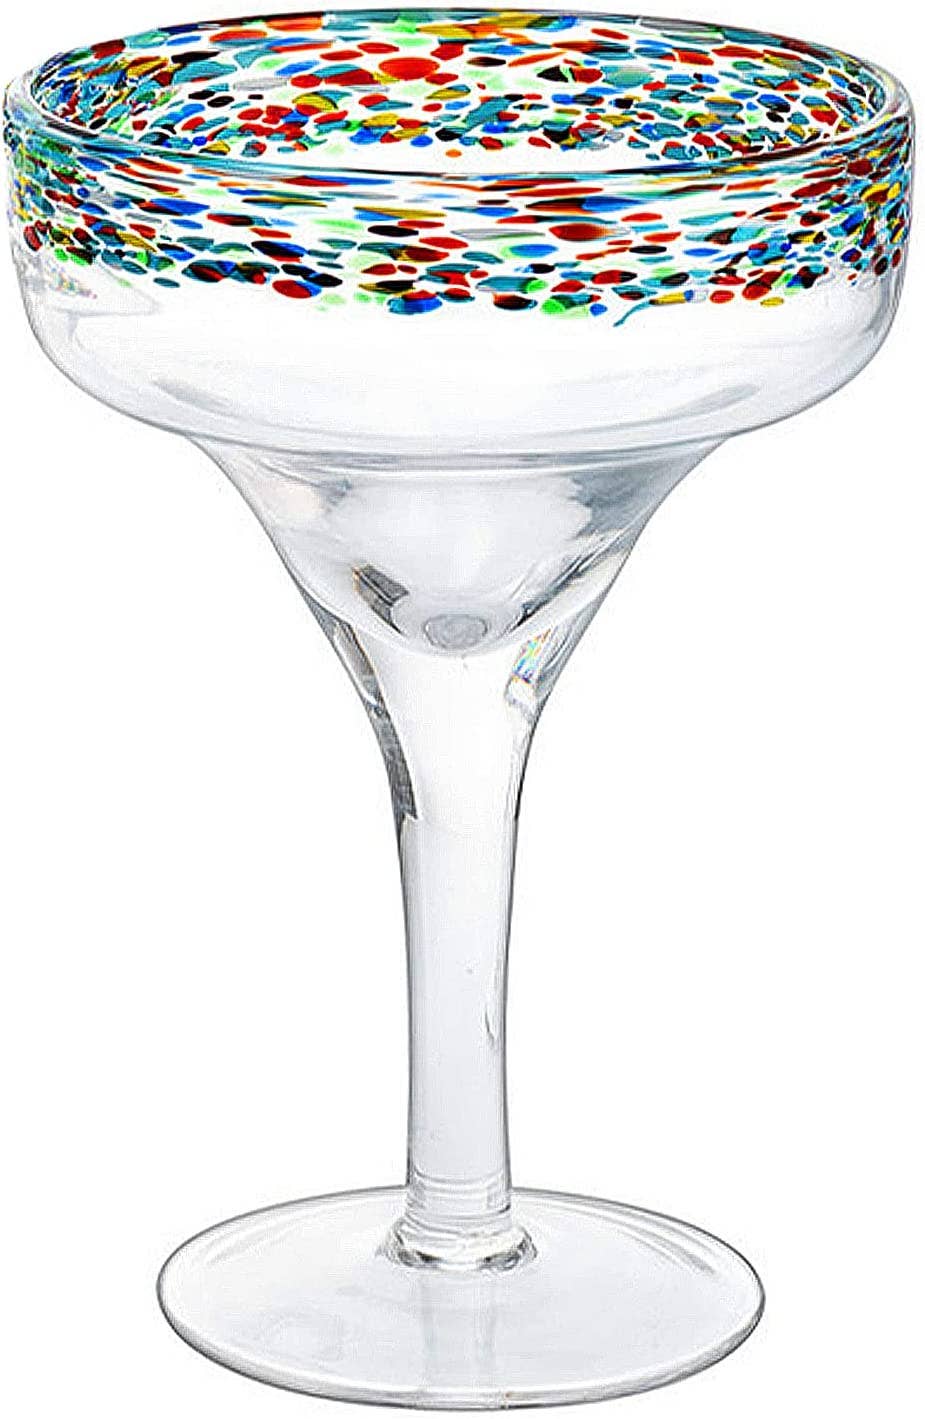 Mexican Hand Blown Margarita Glasses – Set of 4 Large 16oz